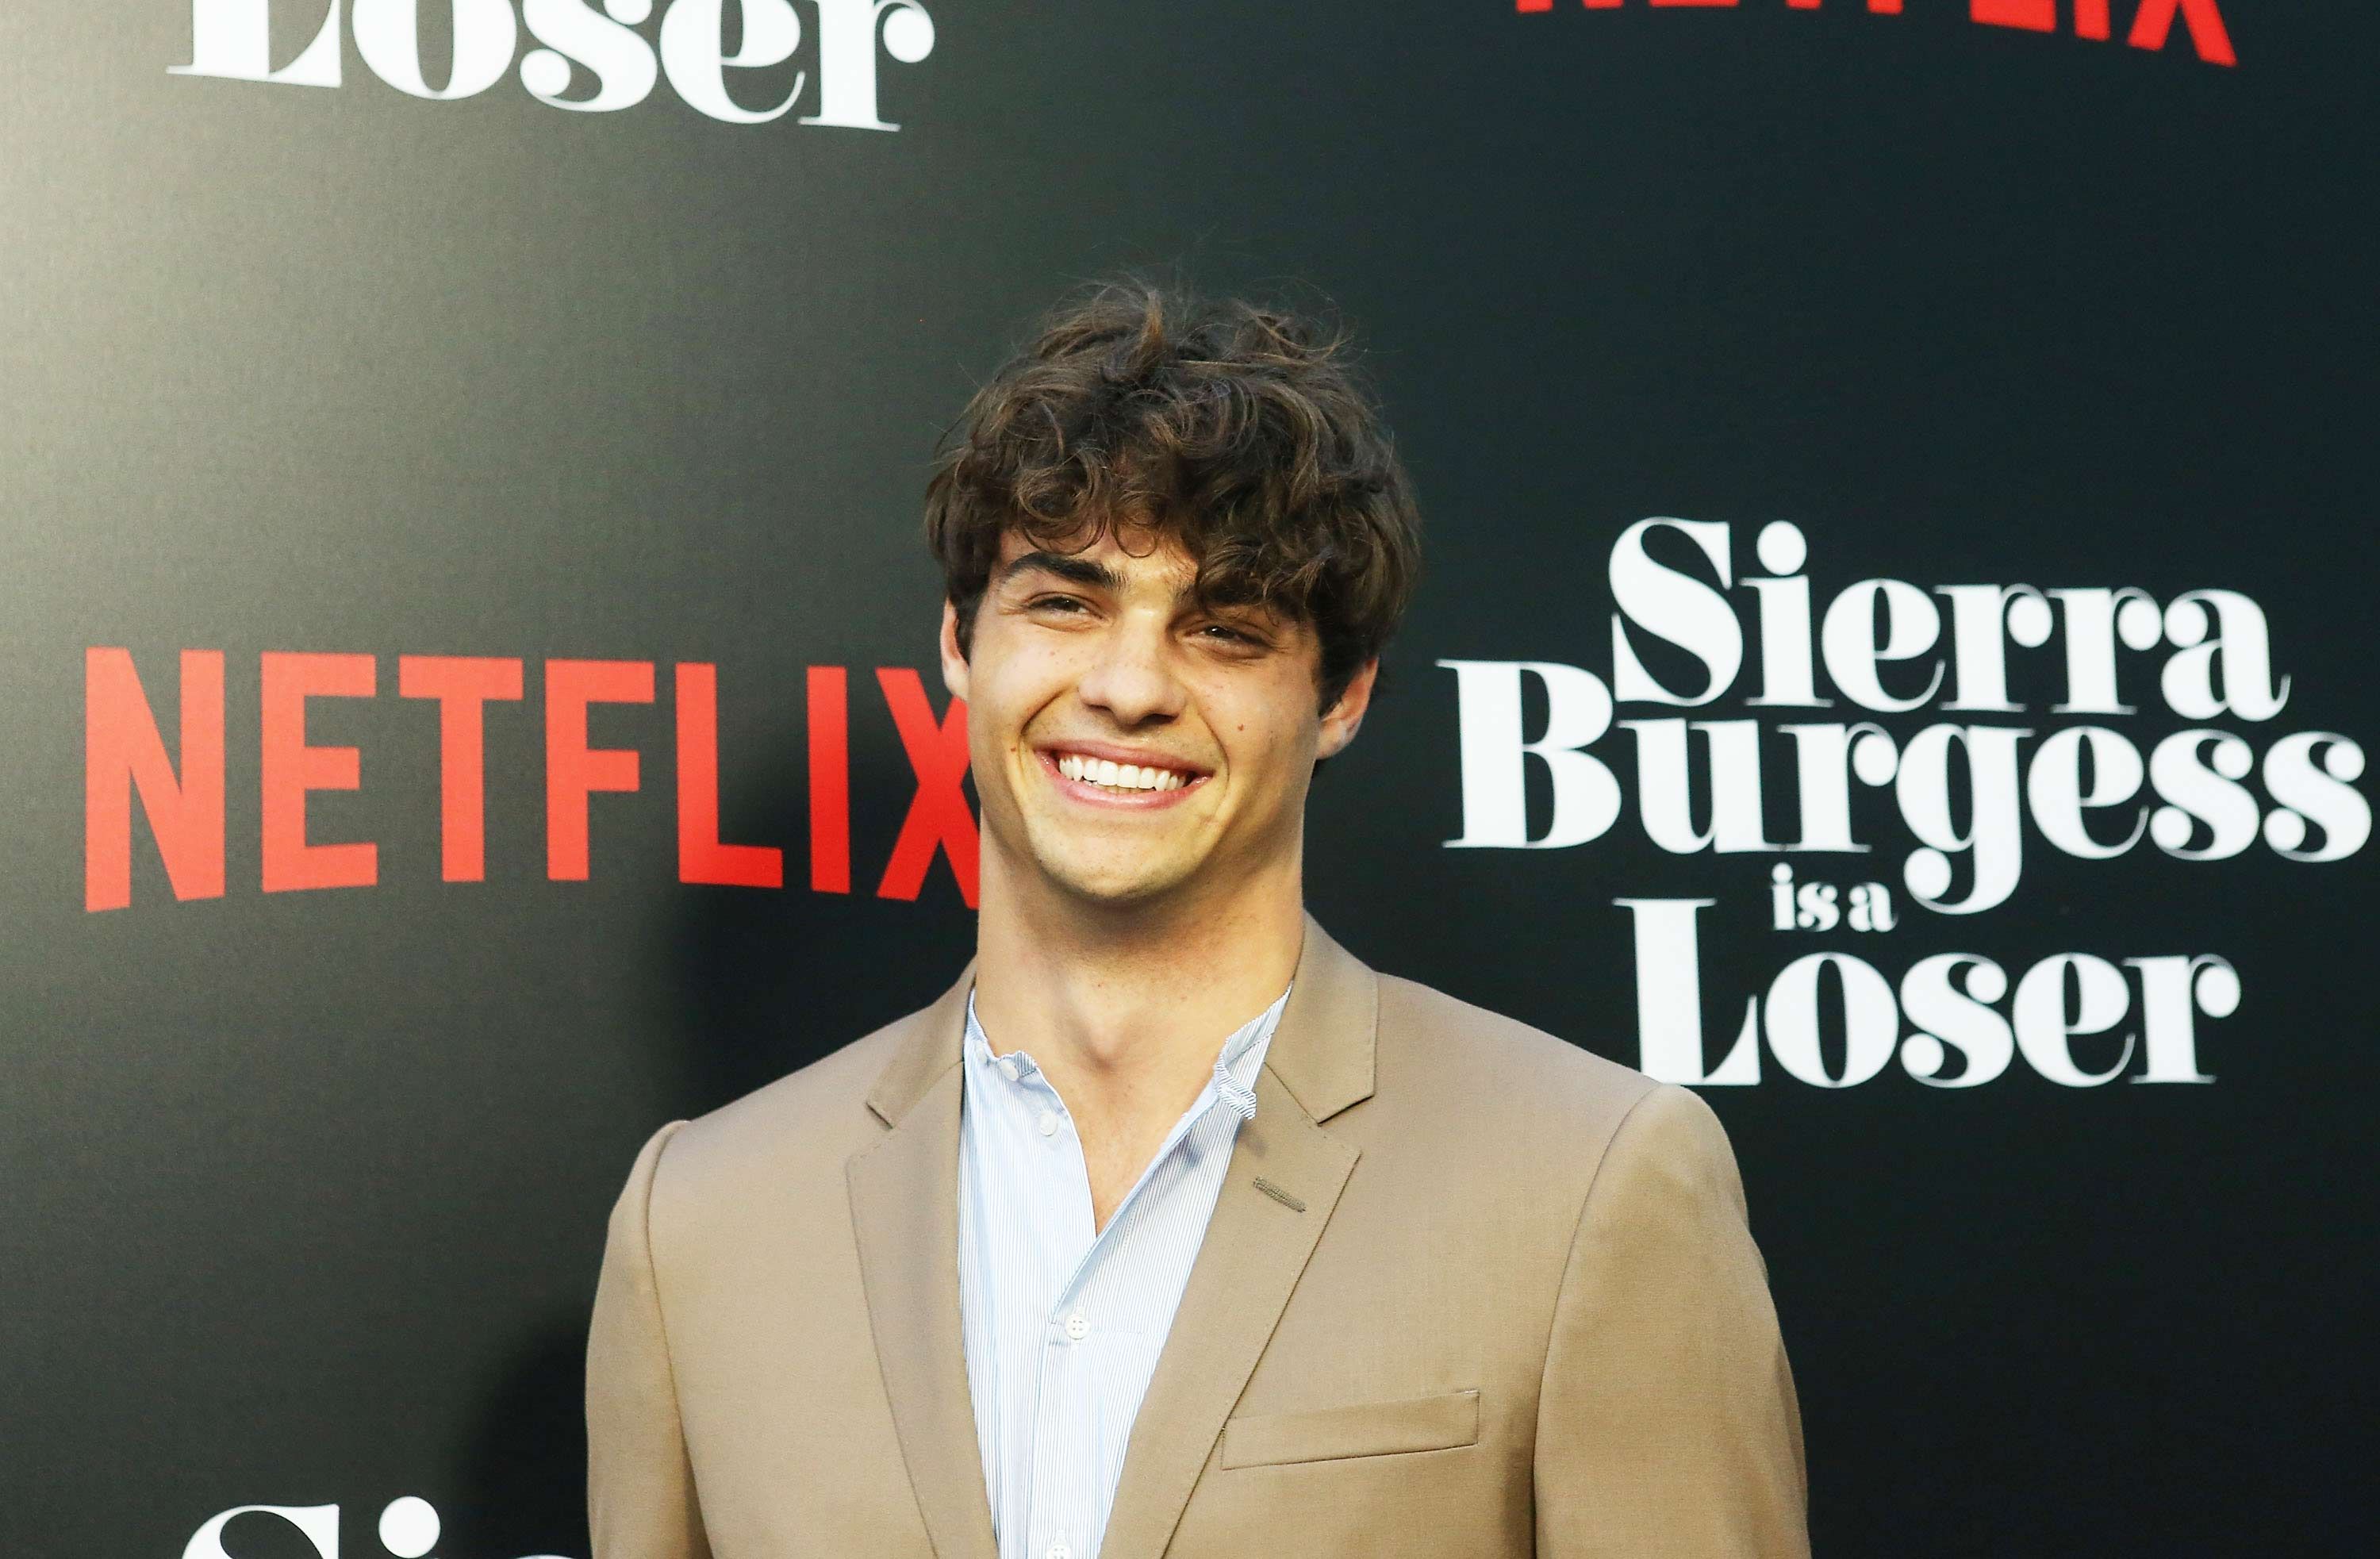 To All the Boys I've Loved Before star Noah Centineo reveals sequel